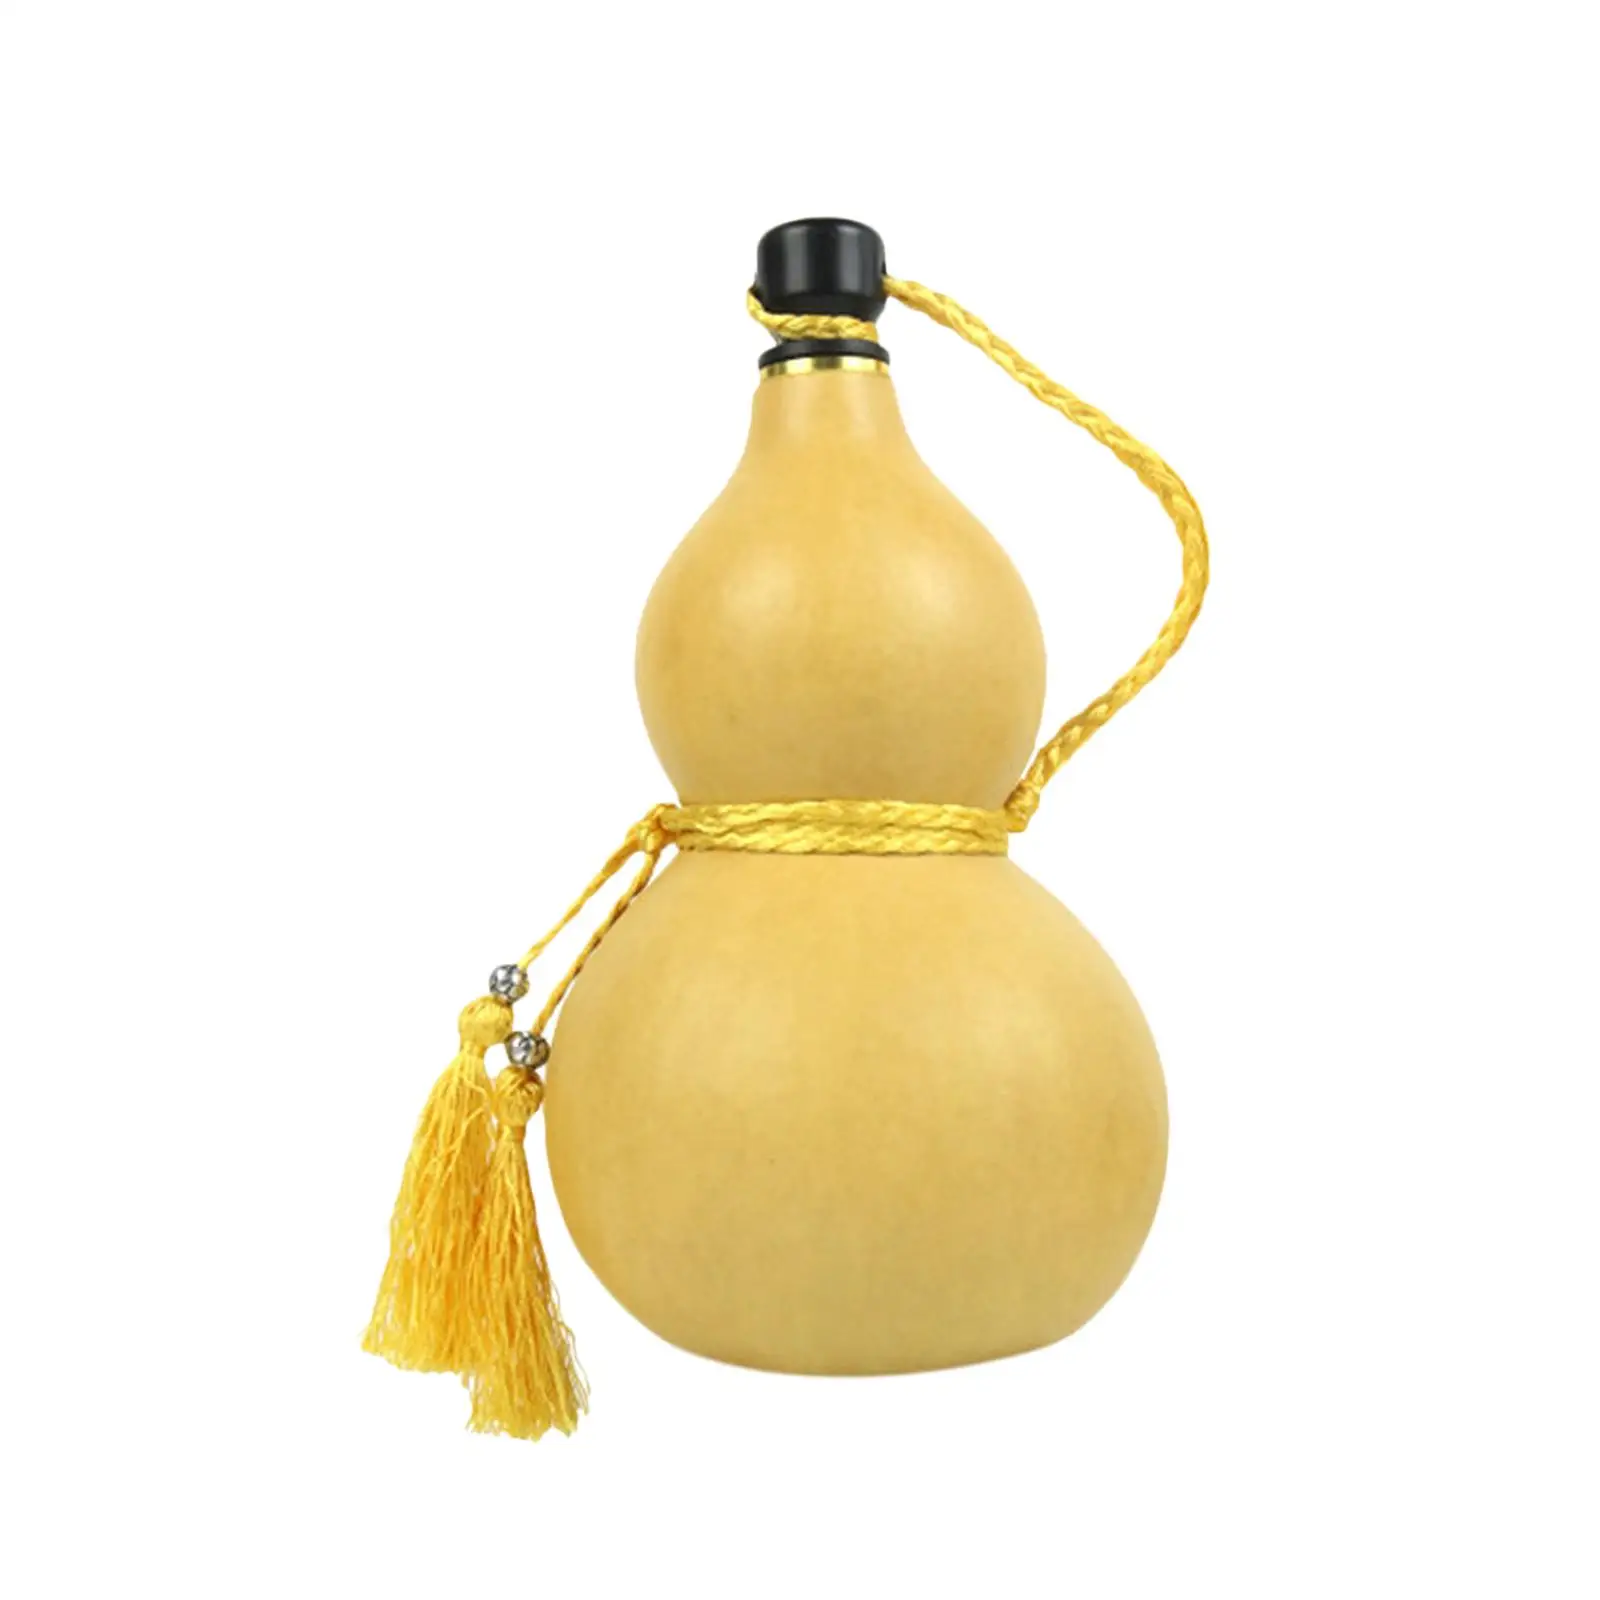 Gourd Water Bottle Dried Gourd Drinking Bottle Crafts Traditional Outdoor Activities Decorative Water Bottle for Home Desk Decor